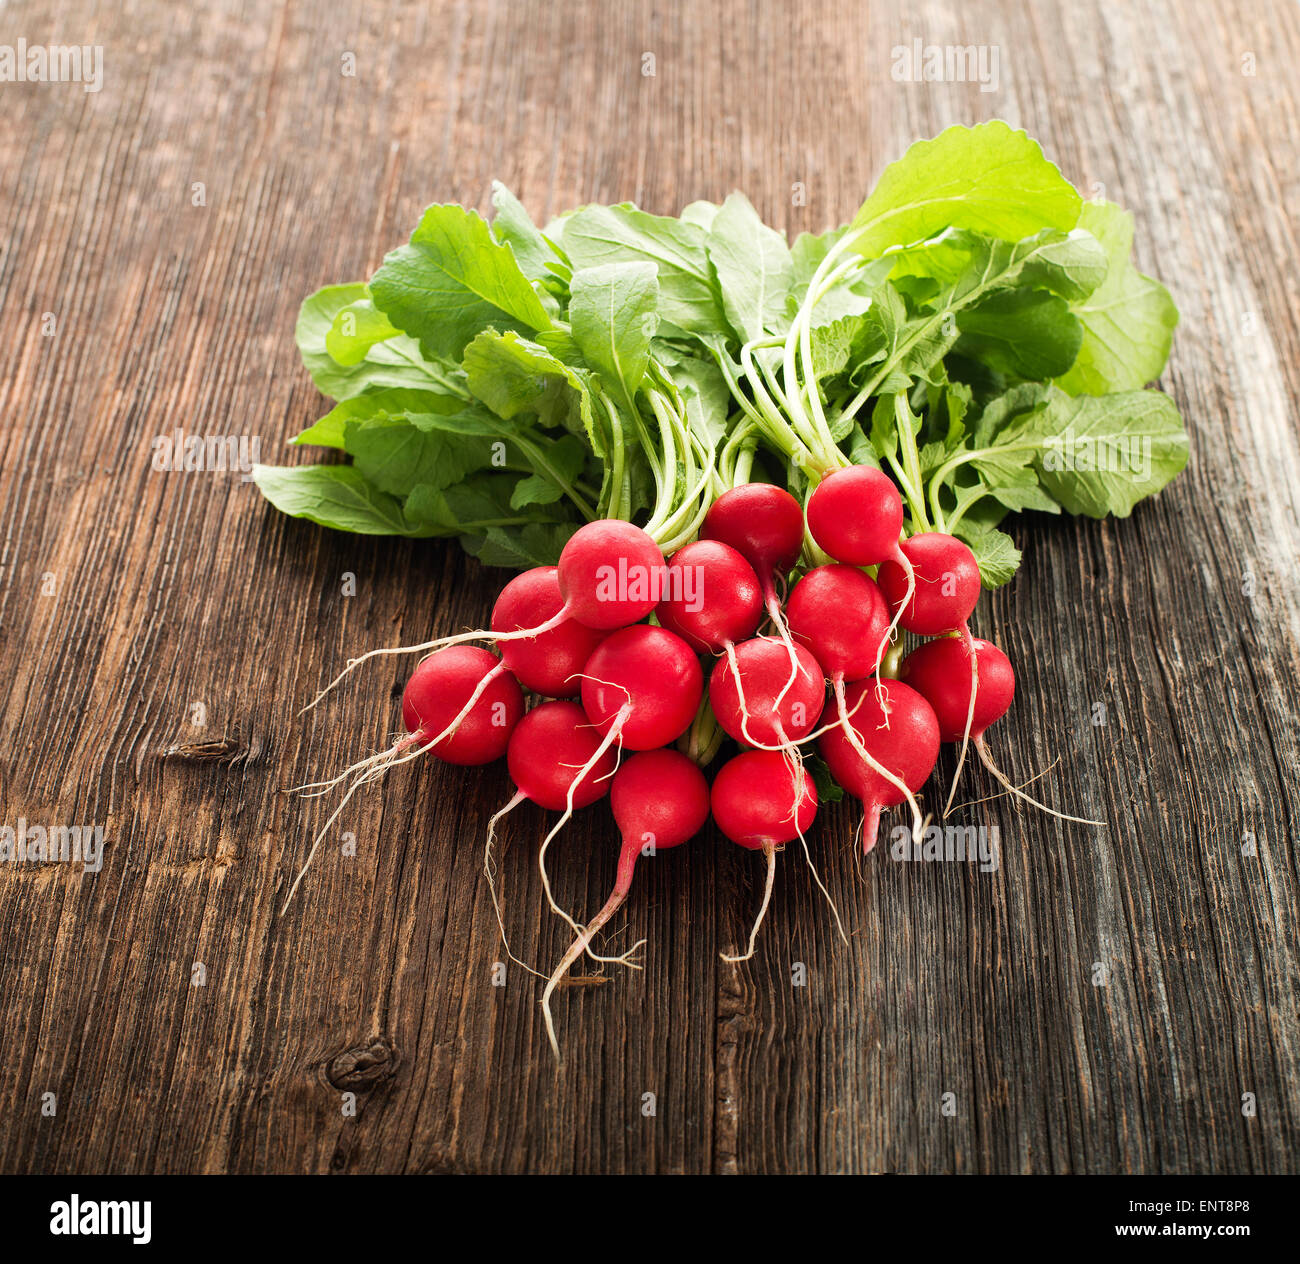 Bunch of fresh red radish on wooden table Stock Photo